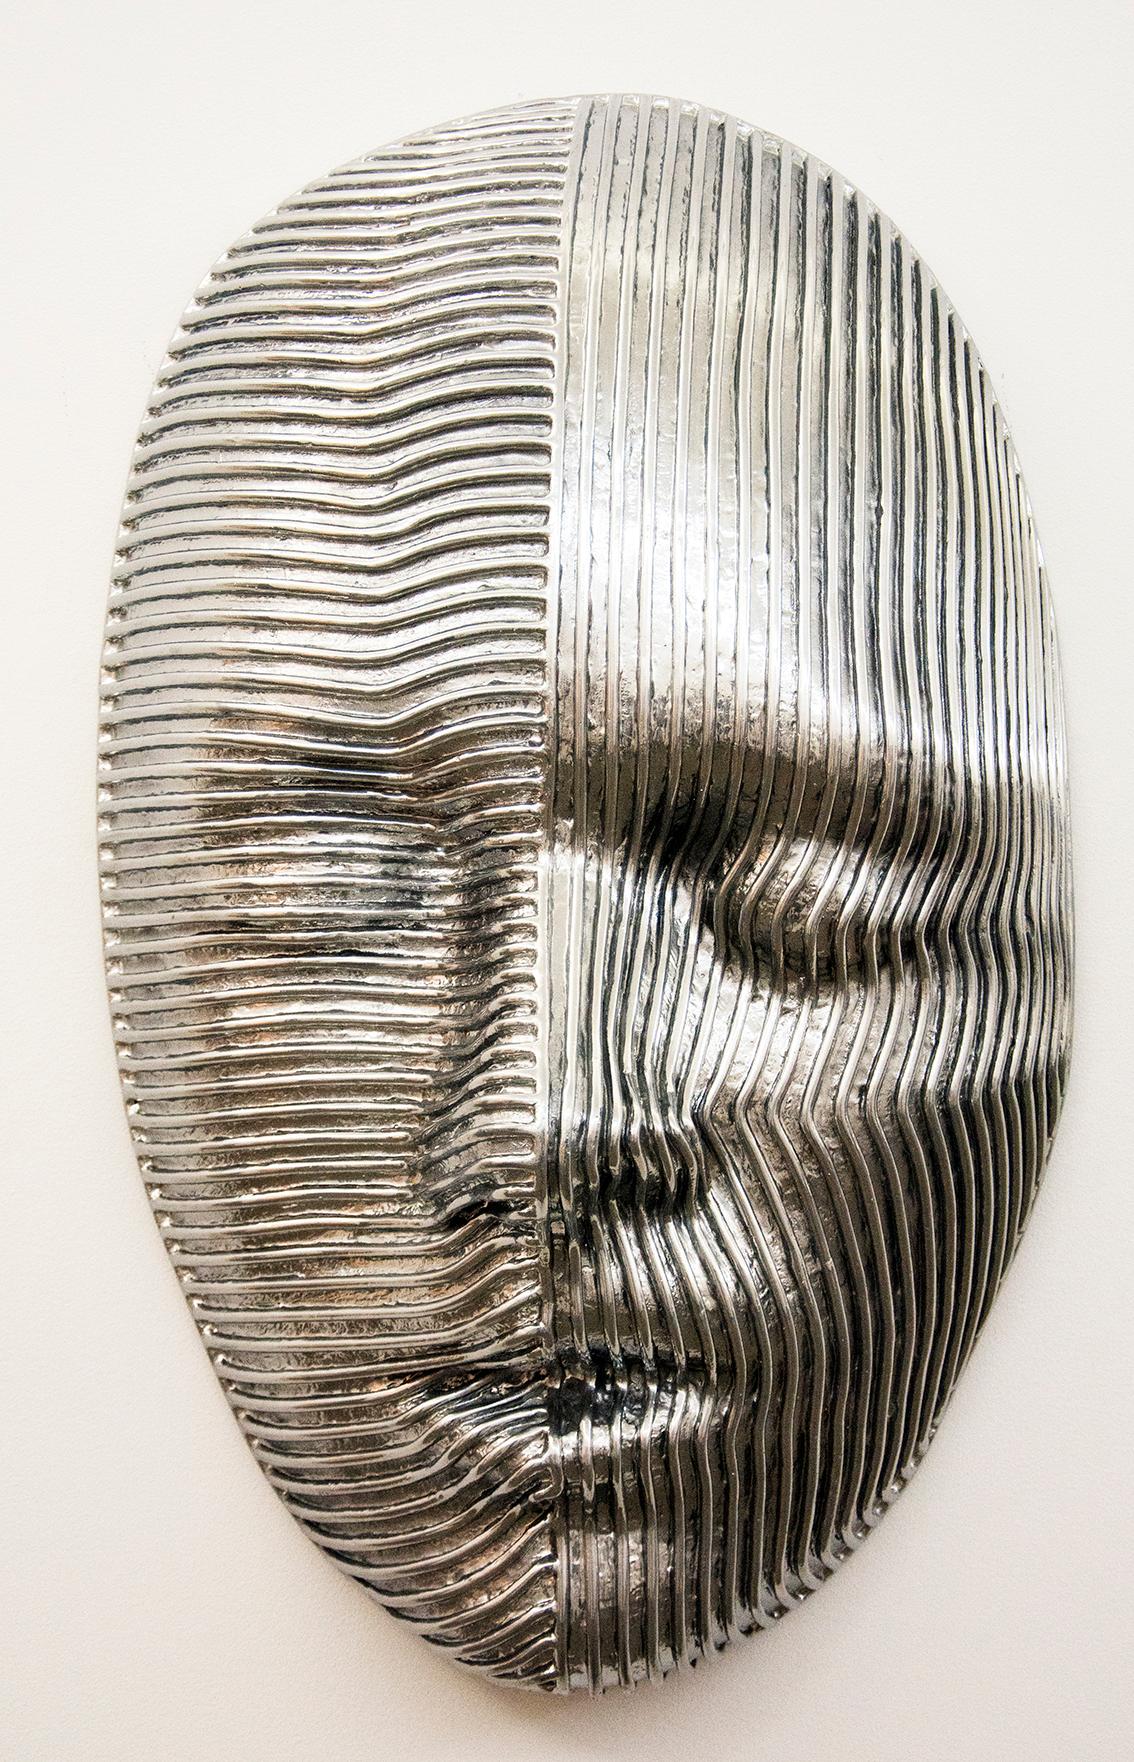 Dale Dunning Figurative Sculpture - Dichotomy - Large Polished Aluminum Wall Sculpture